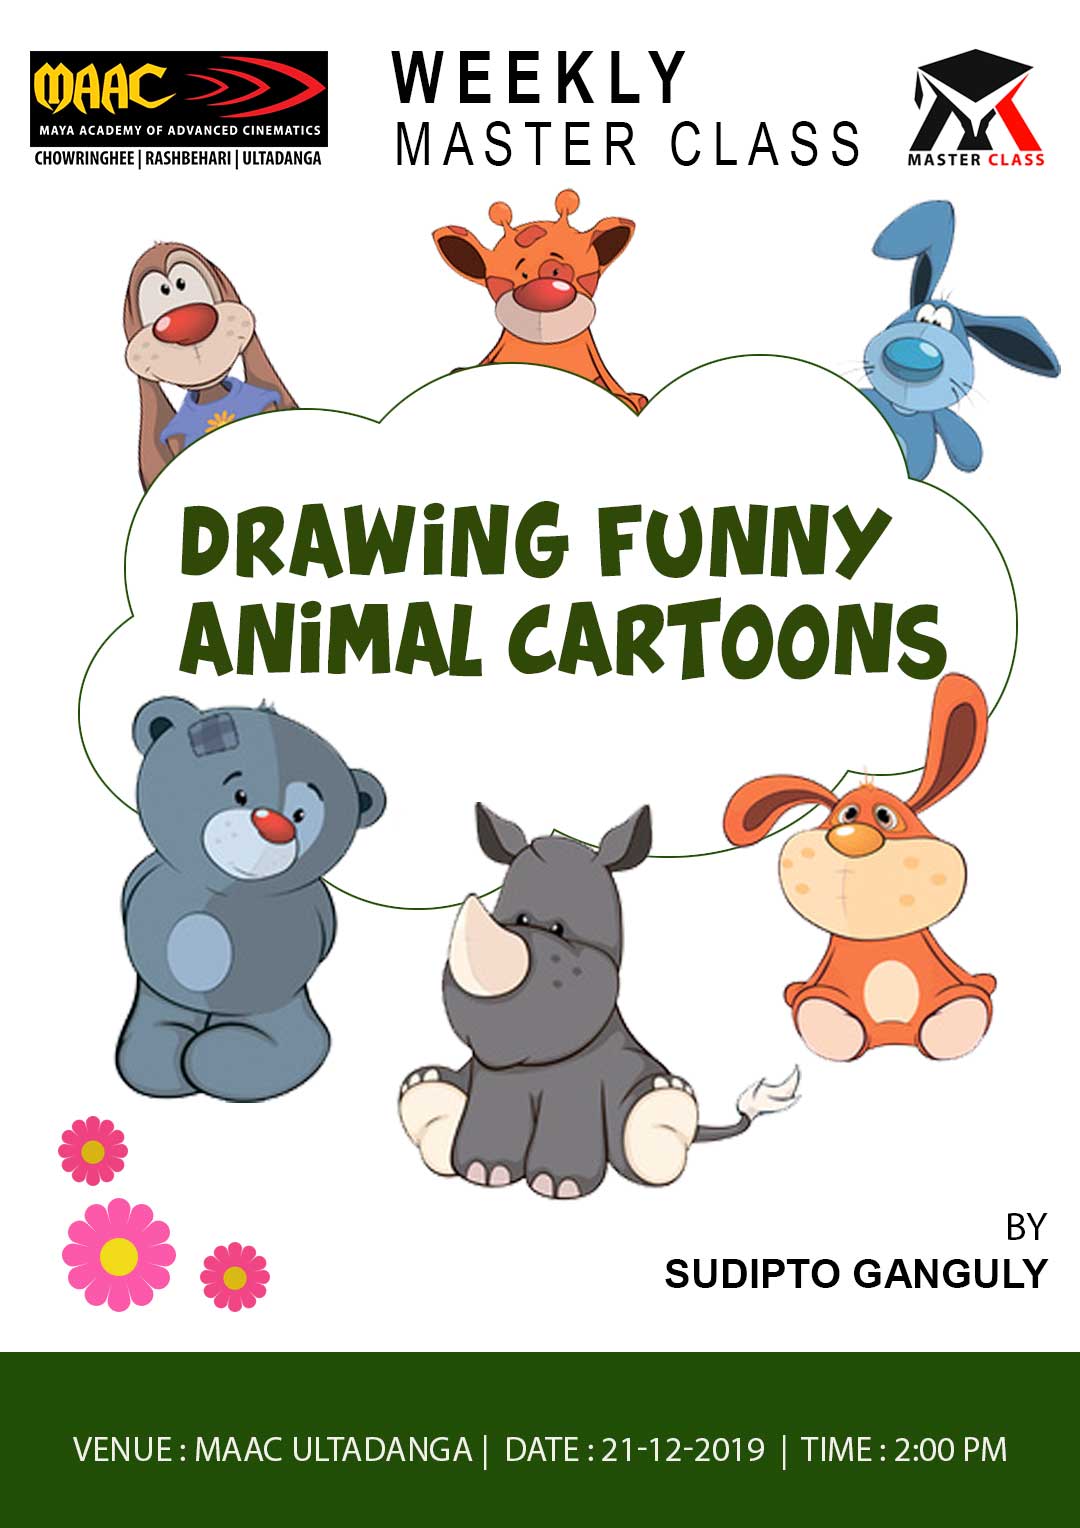 Weekly Master Class on Drawing Funny Animal Cartoons